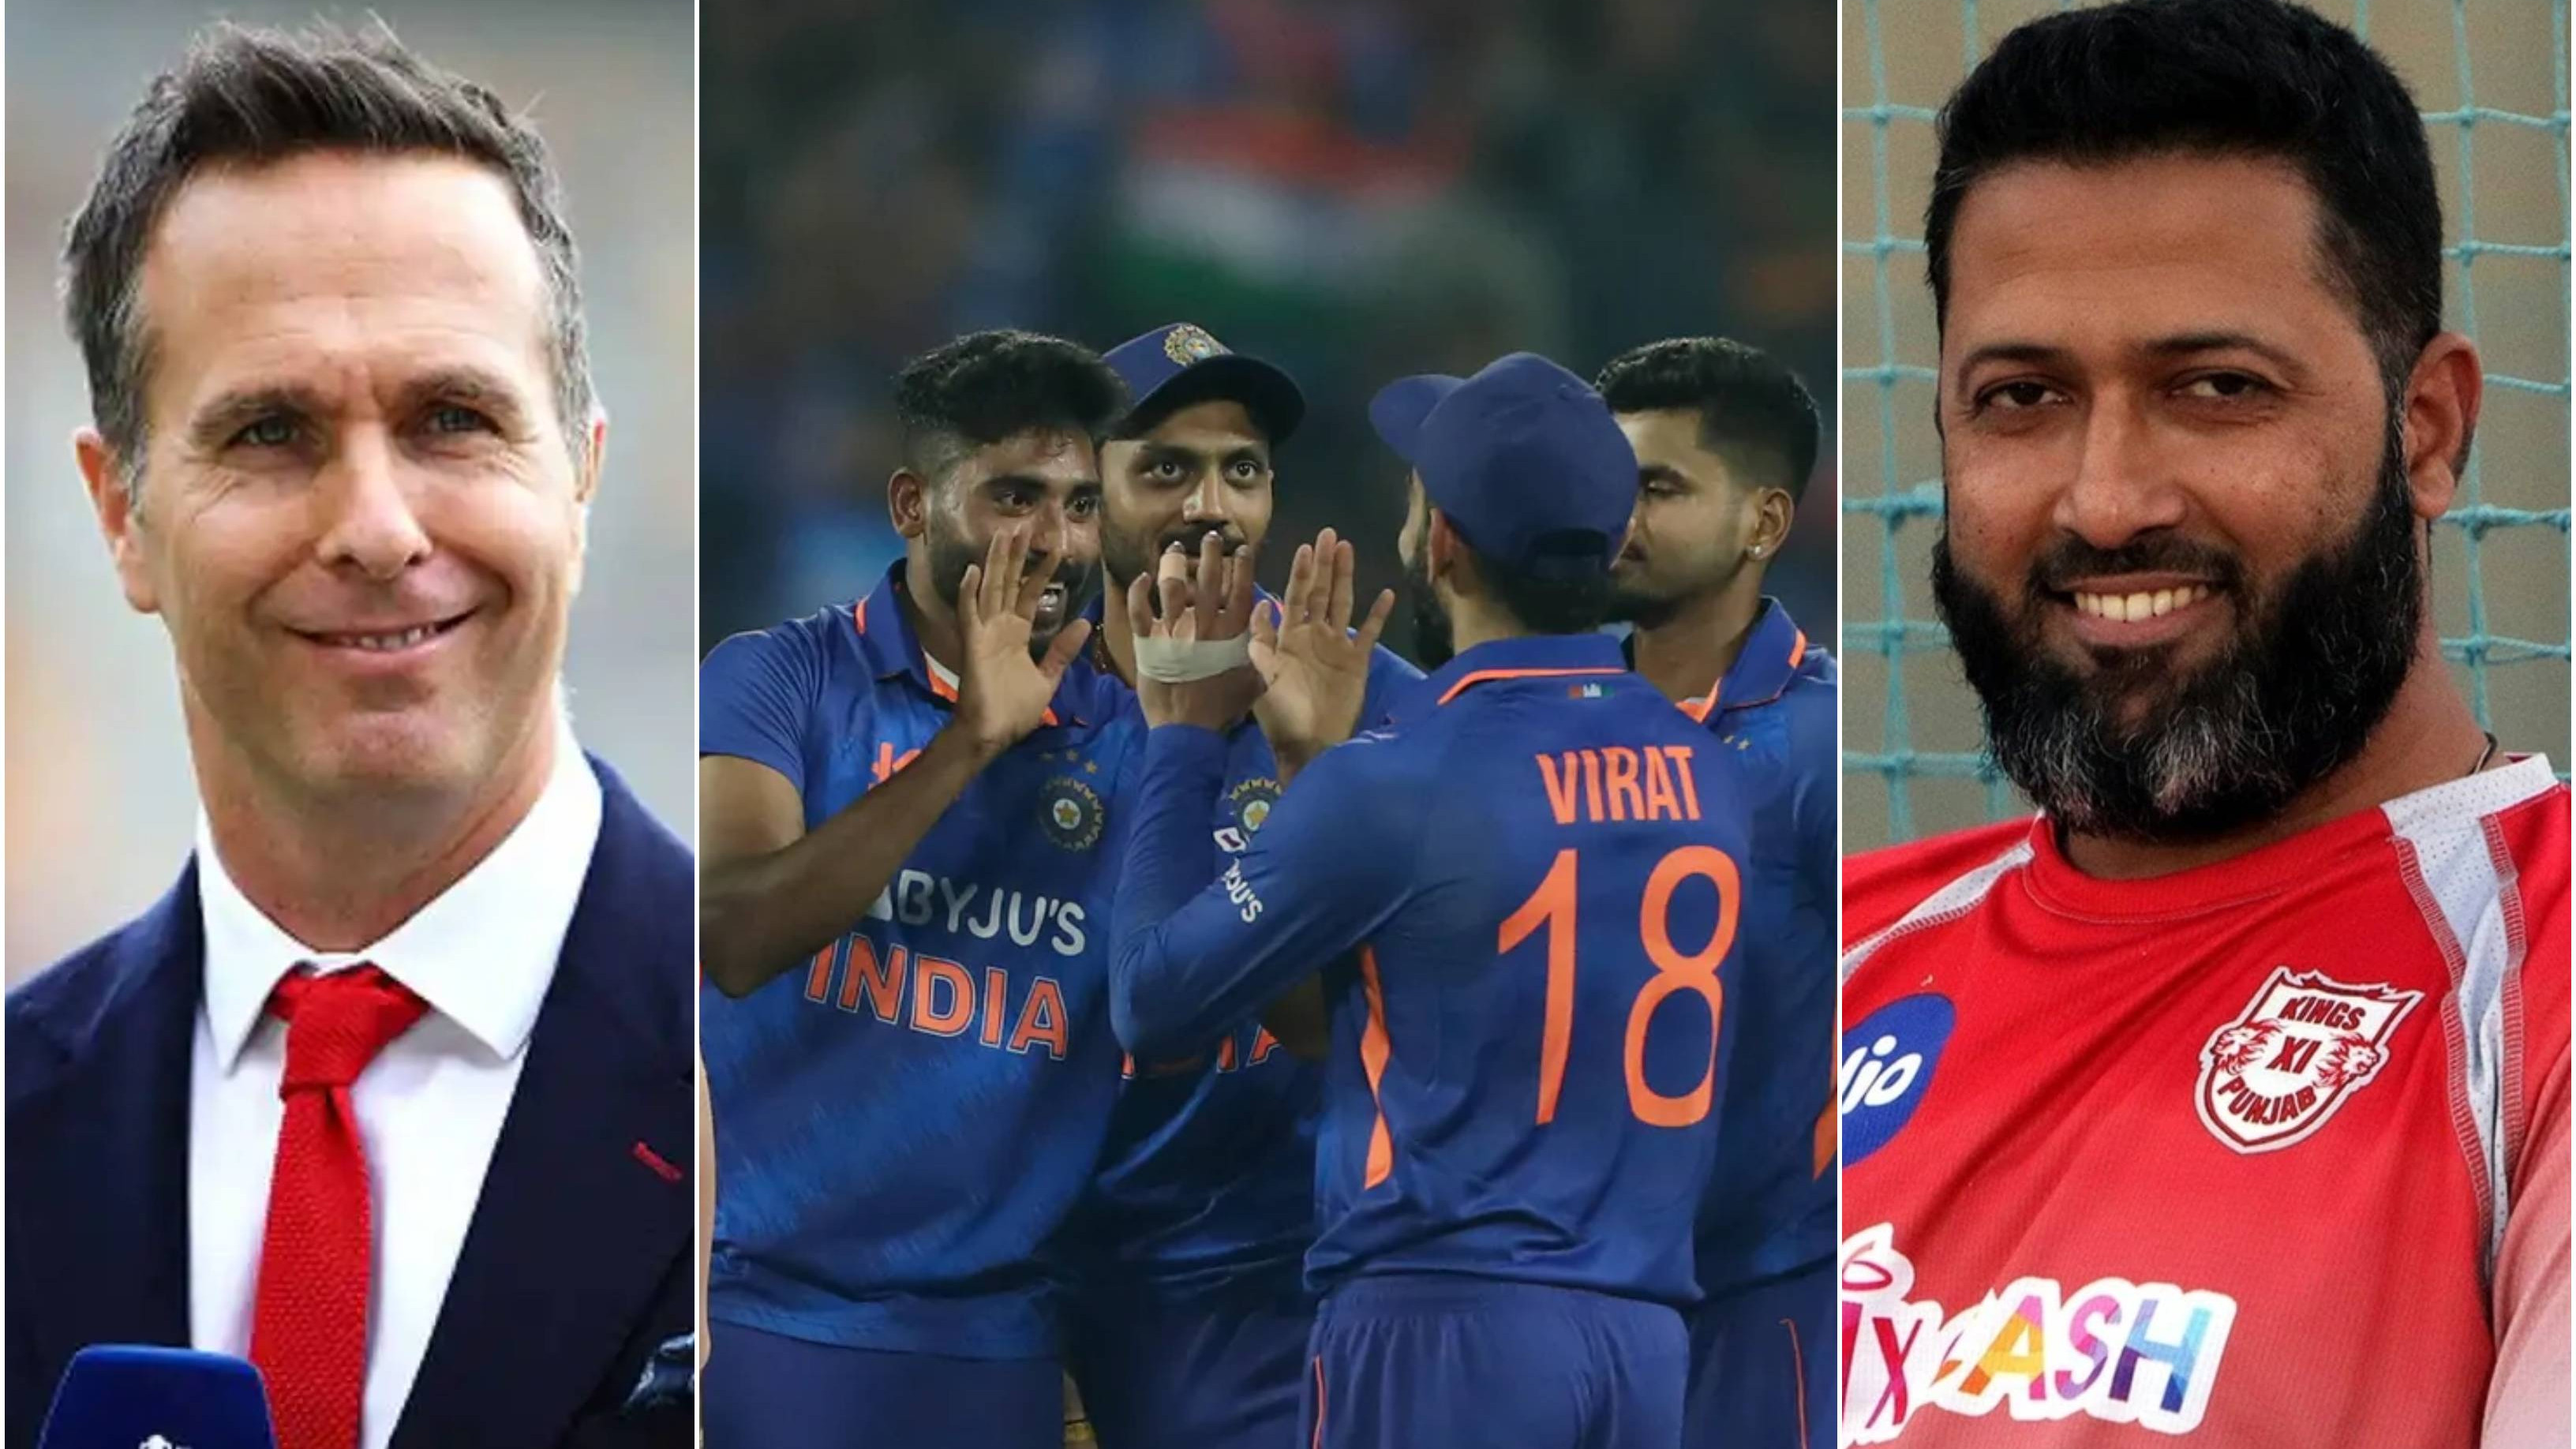 IND v SL 2023: Cricket fraternity lauds Siraj as his lethal spell helps India complete a clean sweep with record win in 3rd ODI